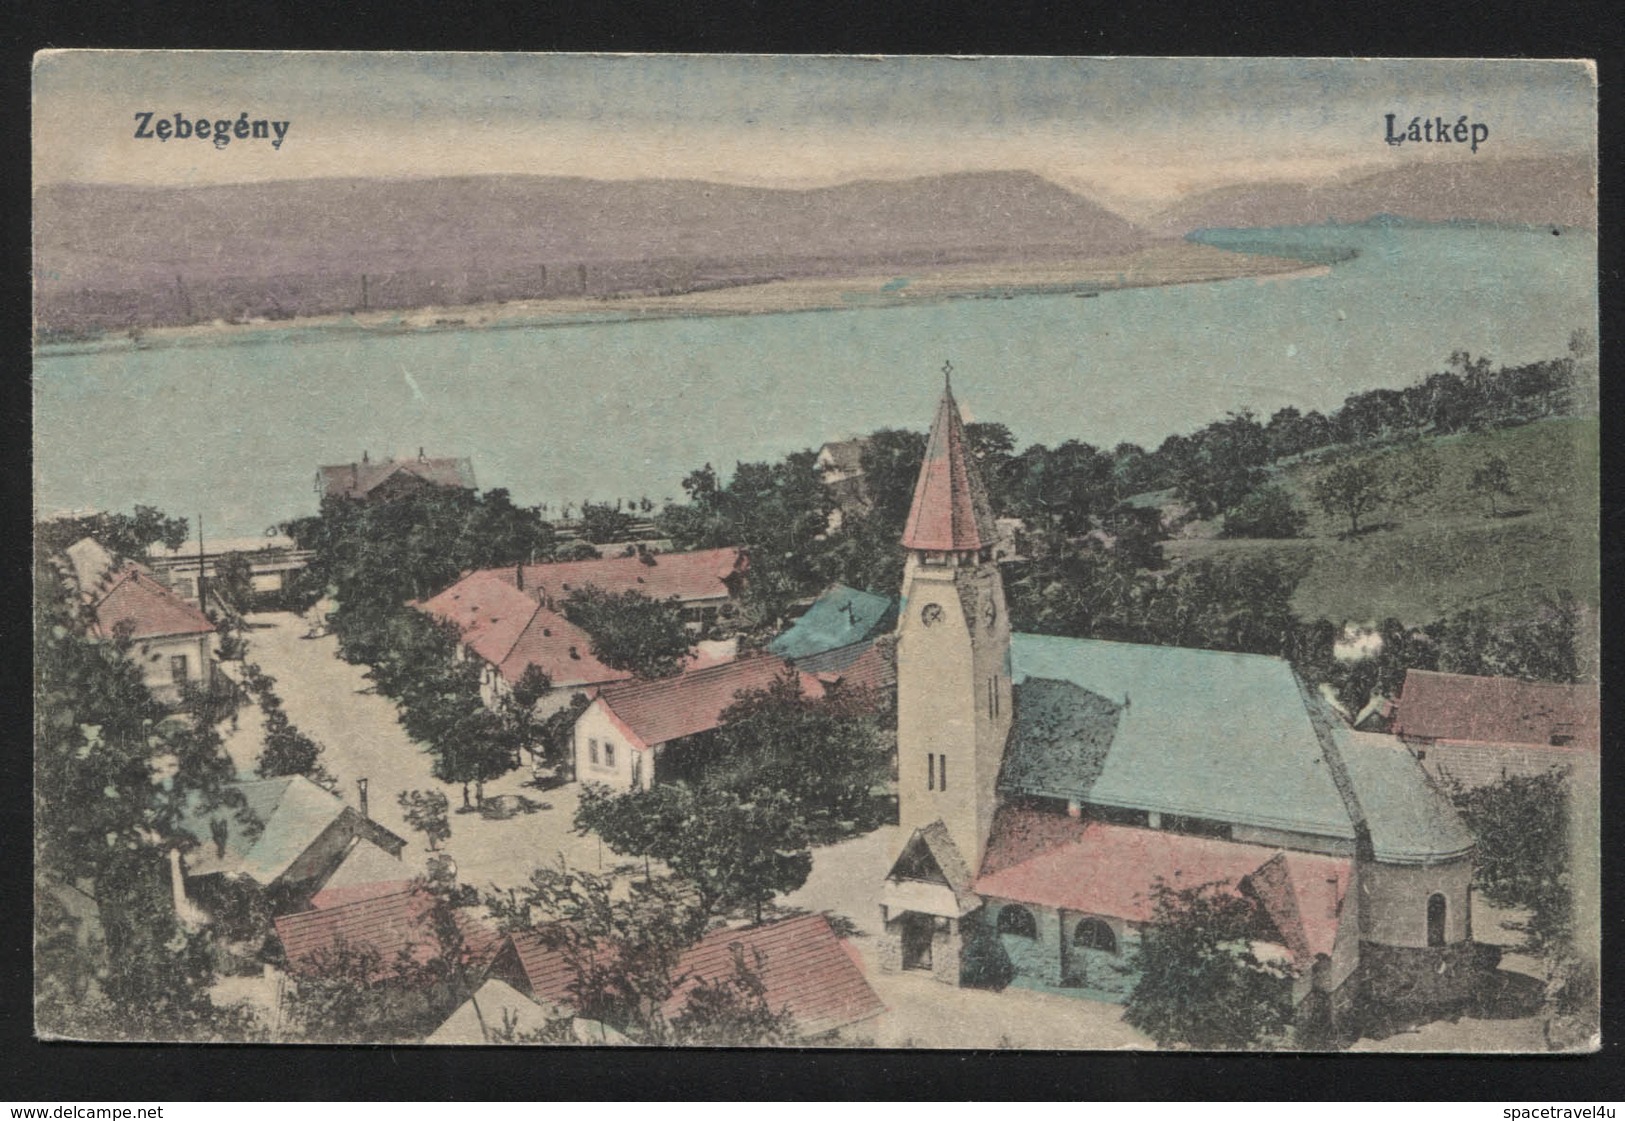 HUNGARY - Zebegény,village In Pest County - View Of The Danube-VINTAGE POSTCARD,1917(APAT#22) - Hongrie